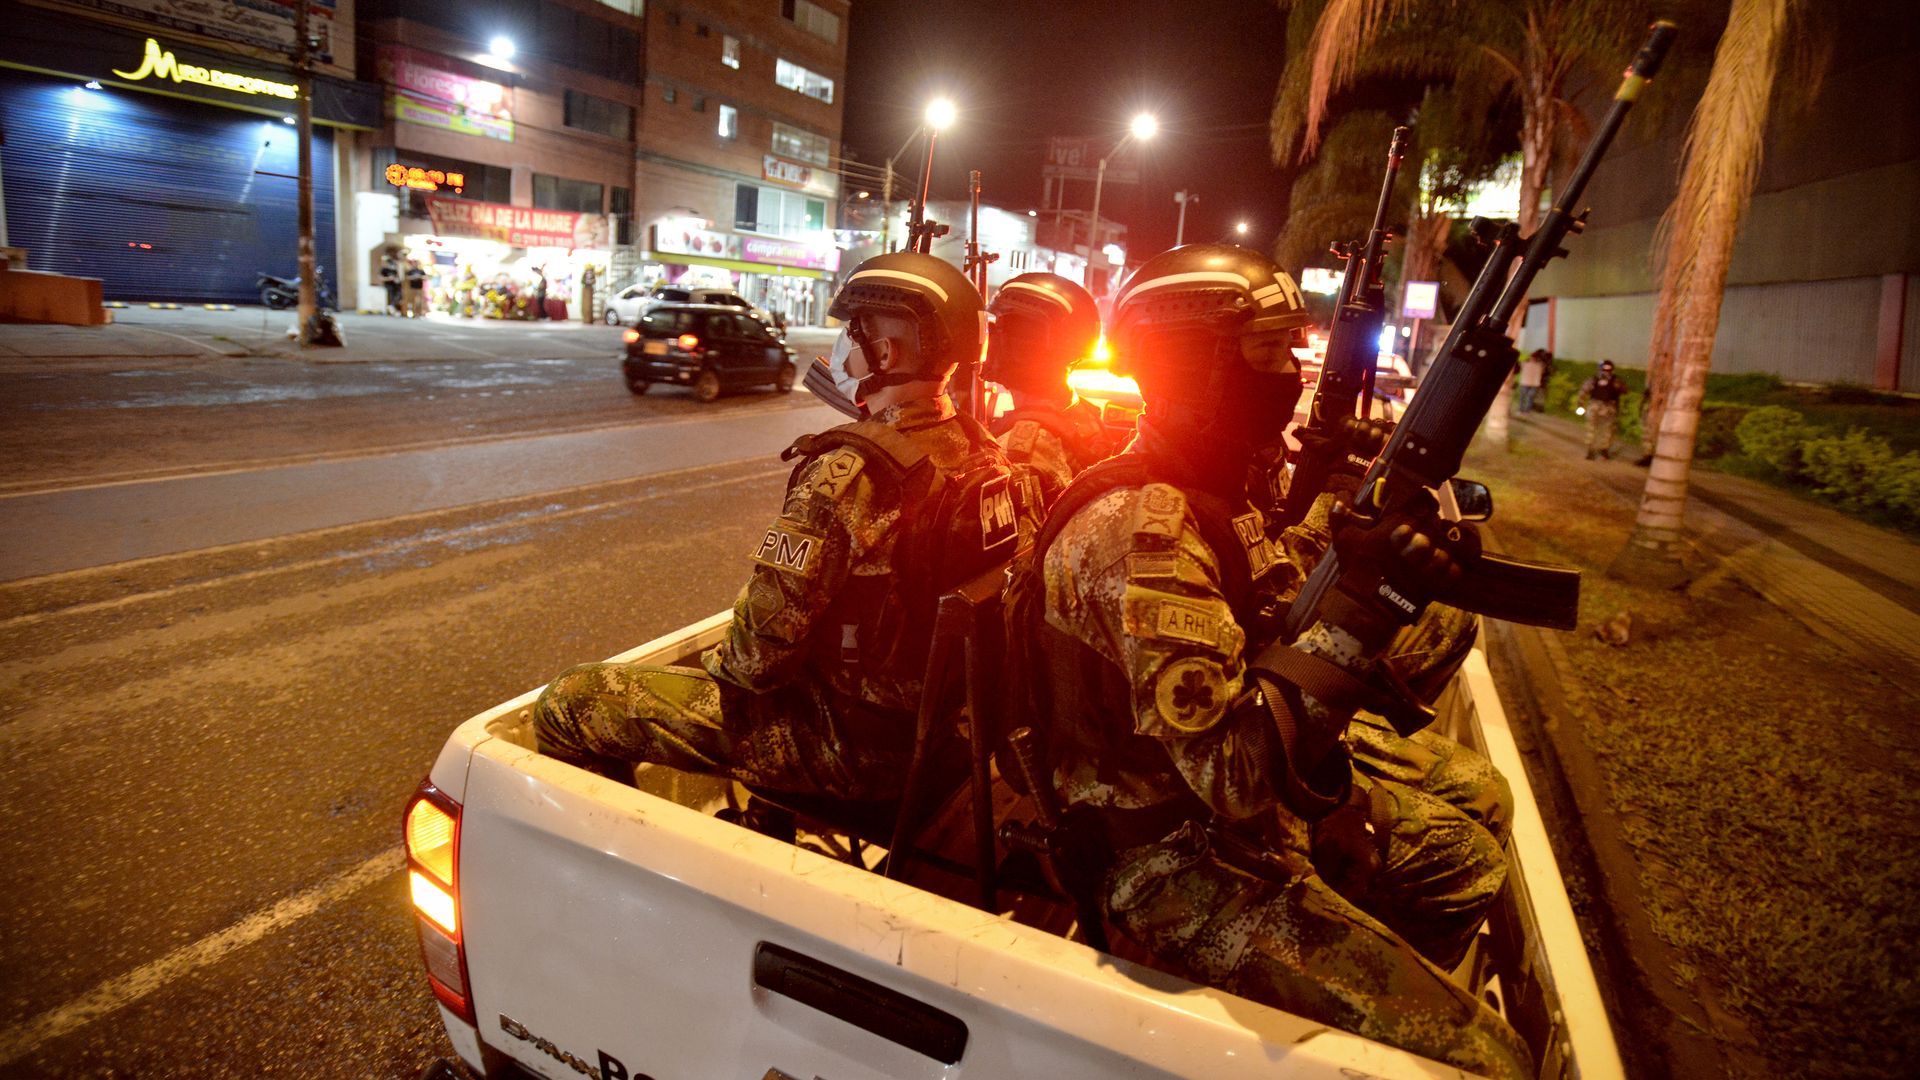 Soldiers on patrol in Cali after being deployed by President Duque 